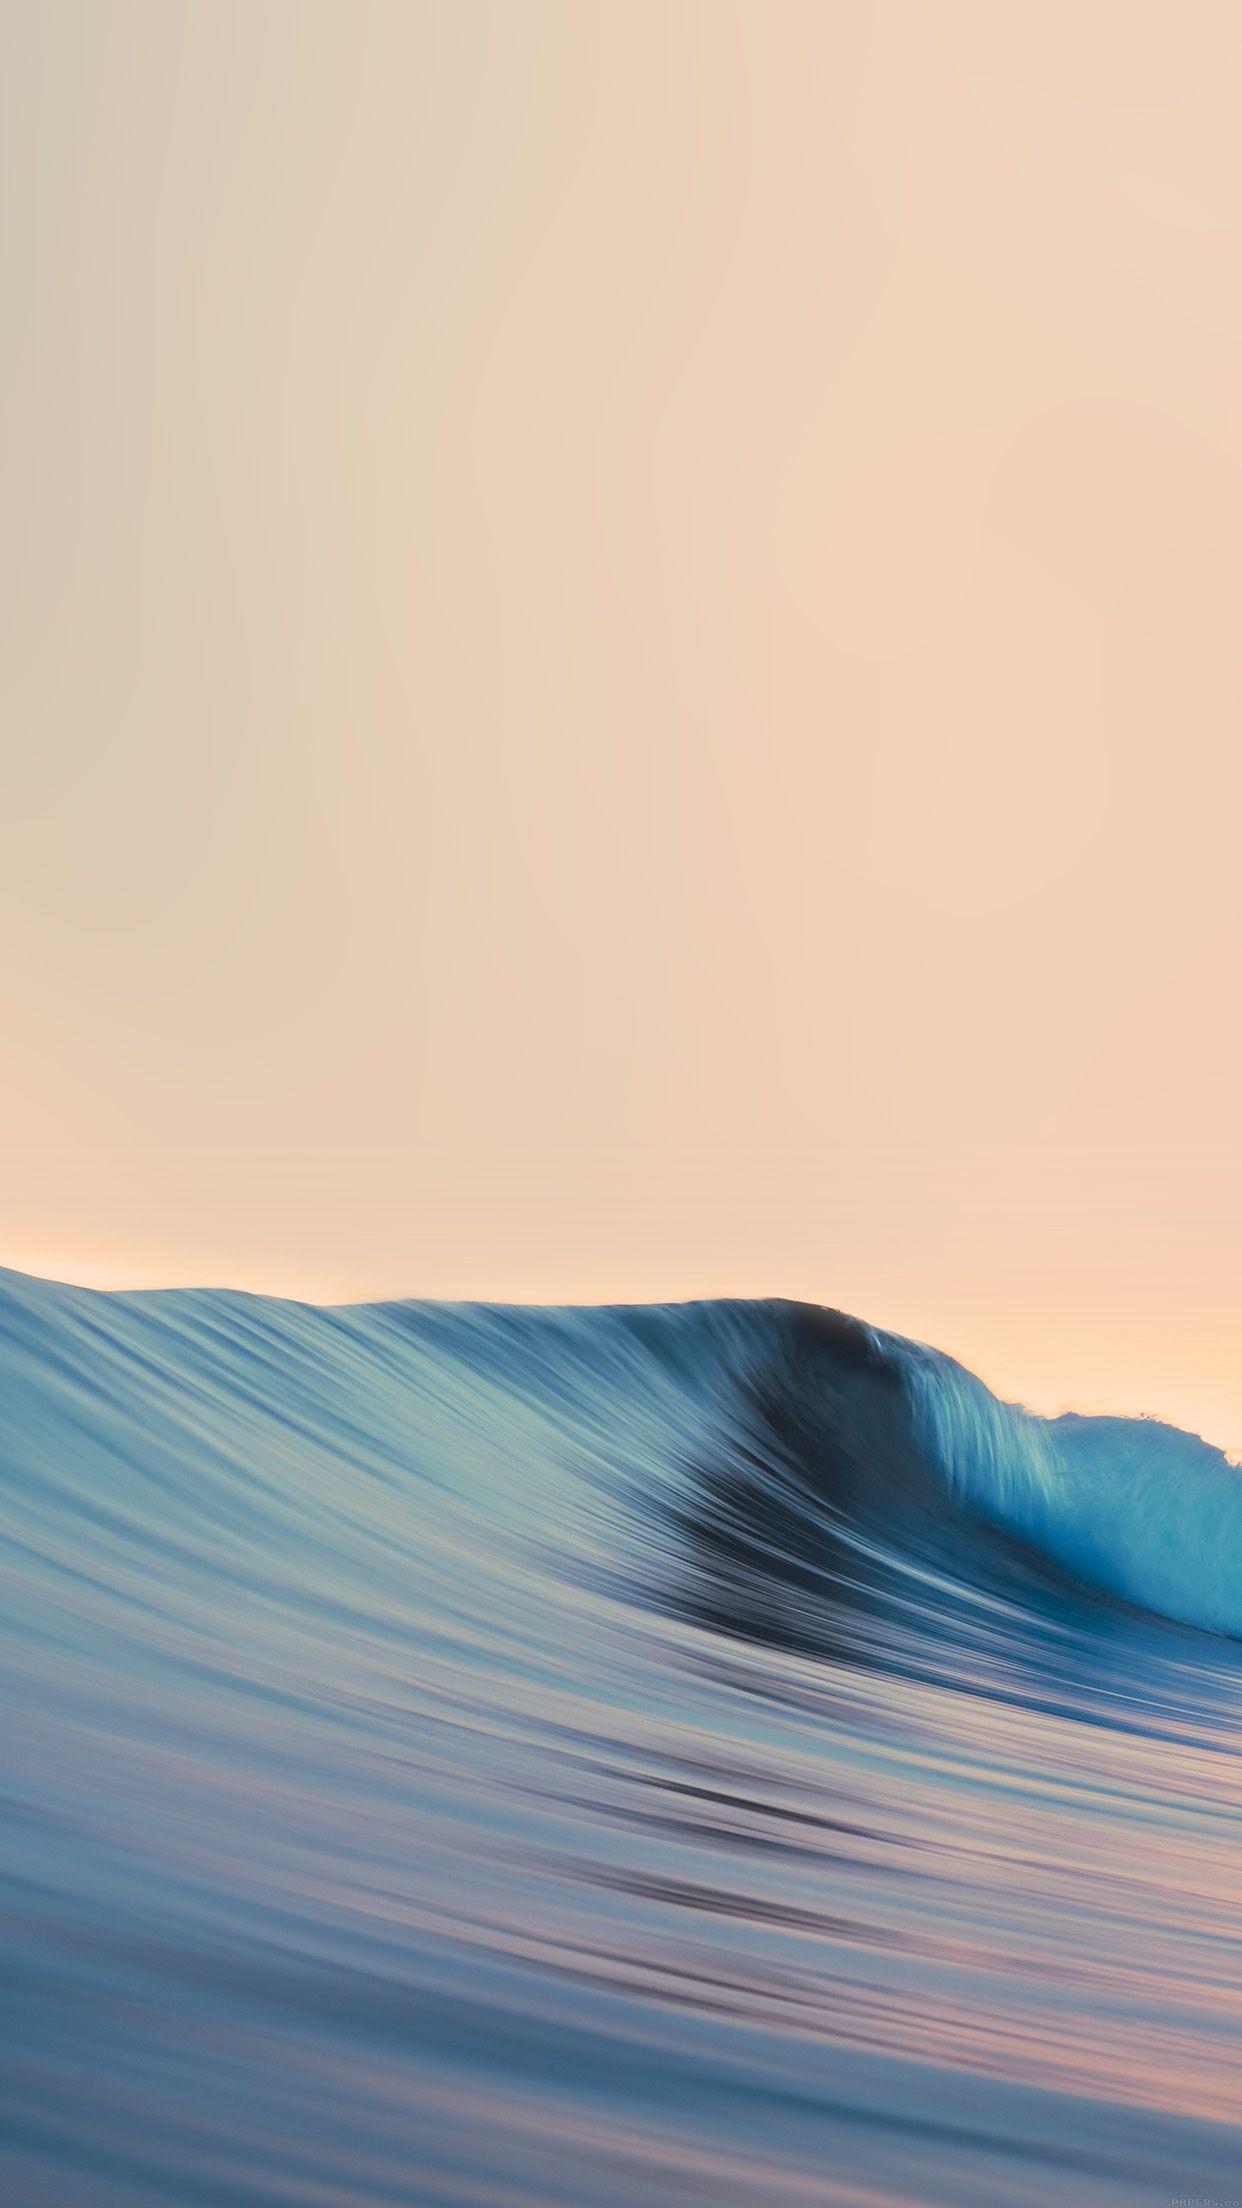 Simple Wave iPhone Wallpapers - Top Free Simple Wave iPhone Backgrounds ...